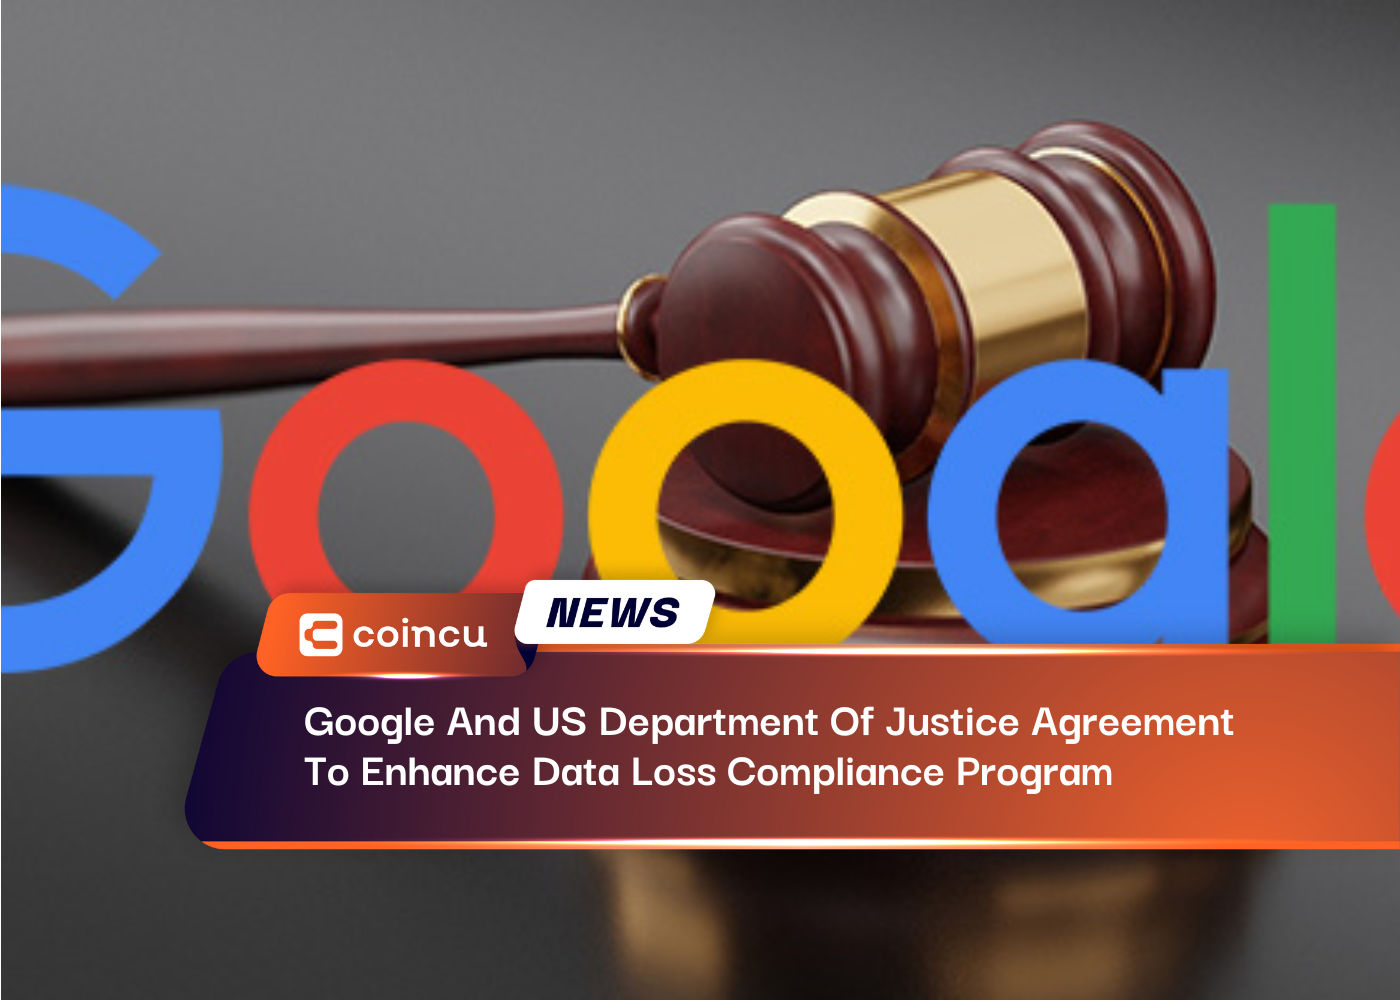 Google And US Department Of Justice Agreement To Enhance Data Loss Compliance Program